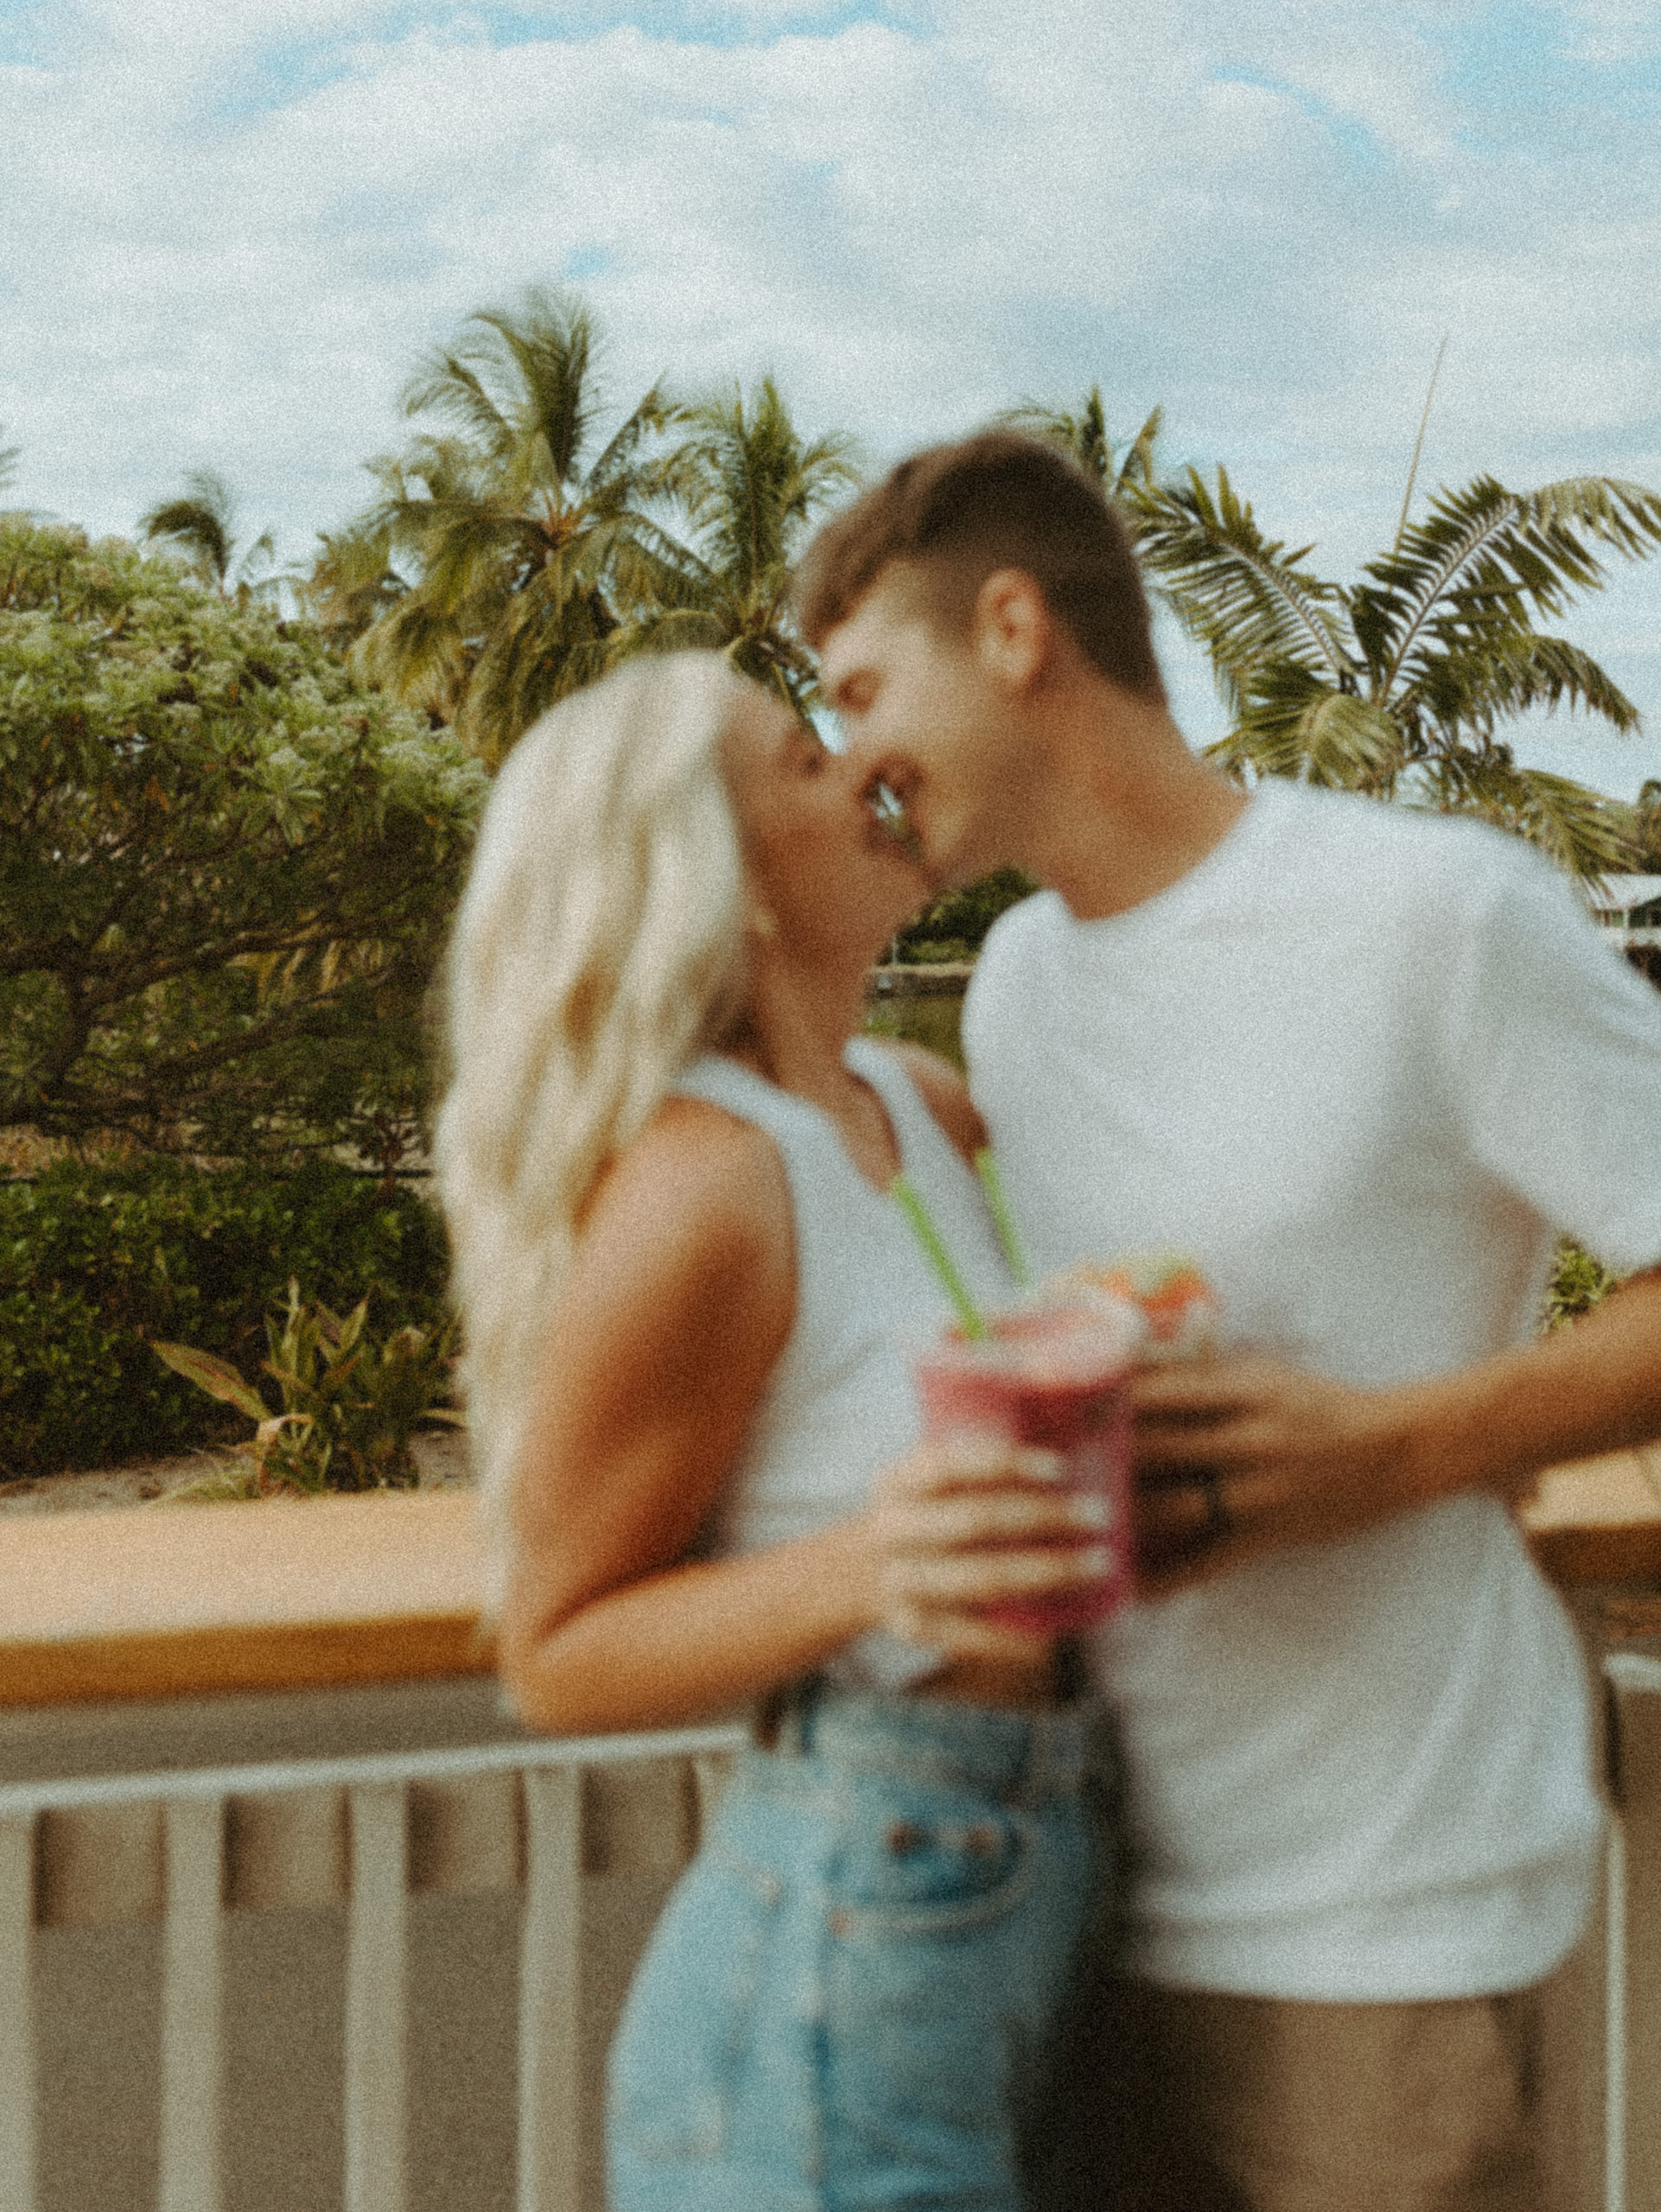 the couple leaning in to kiss at the smoothie bowls